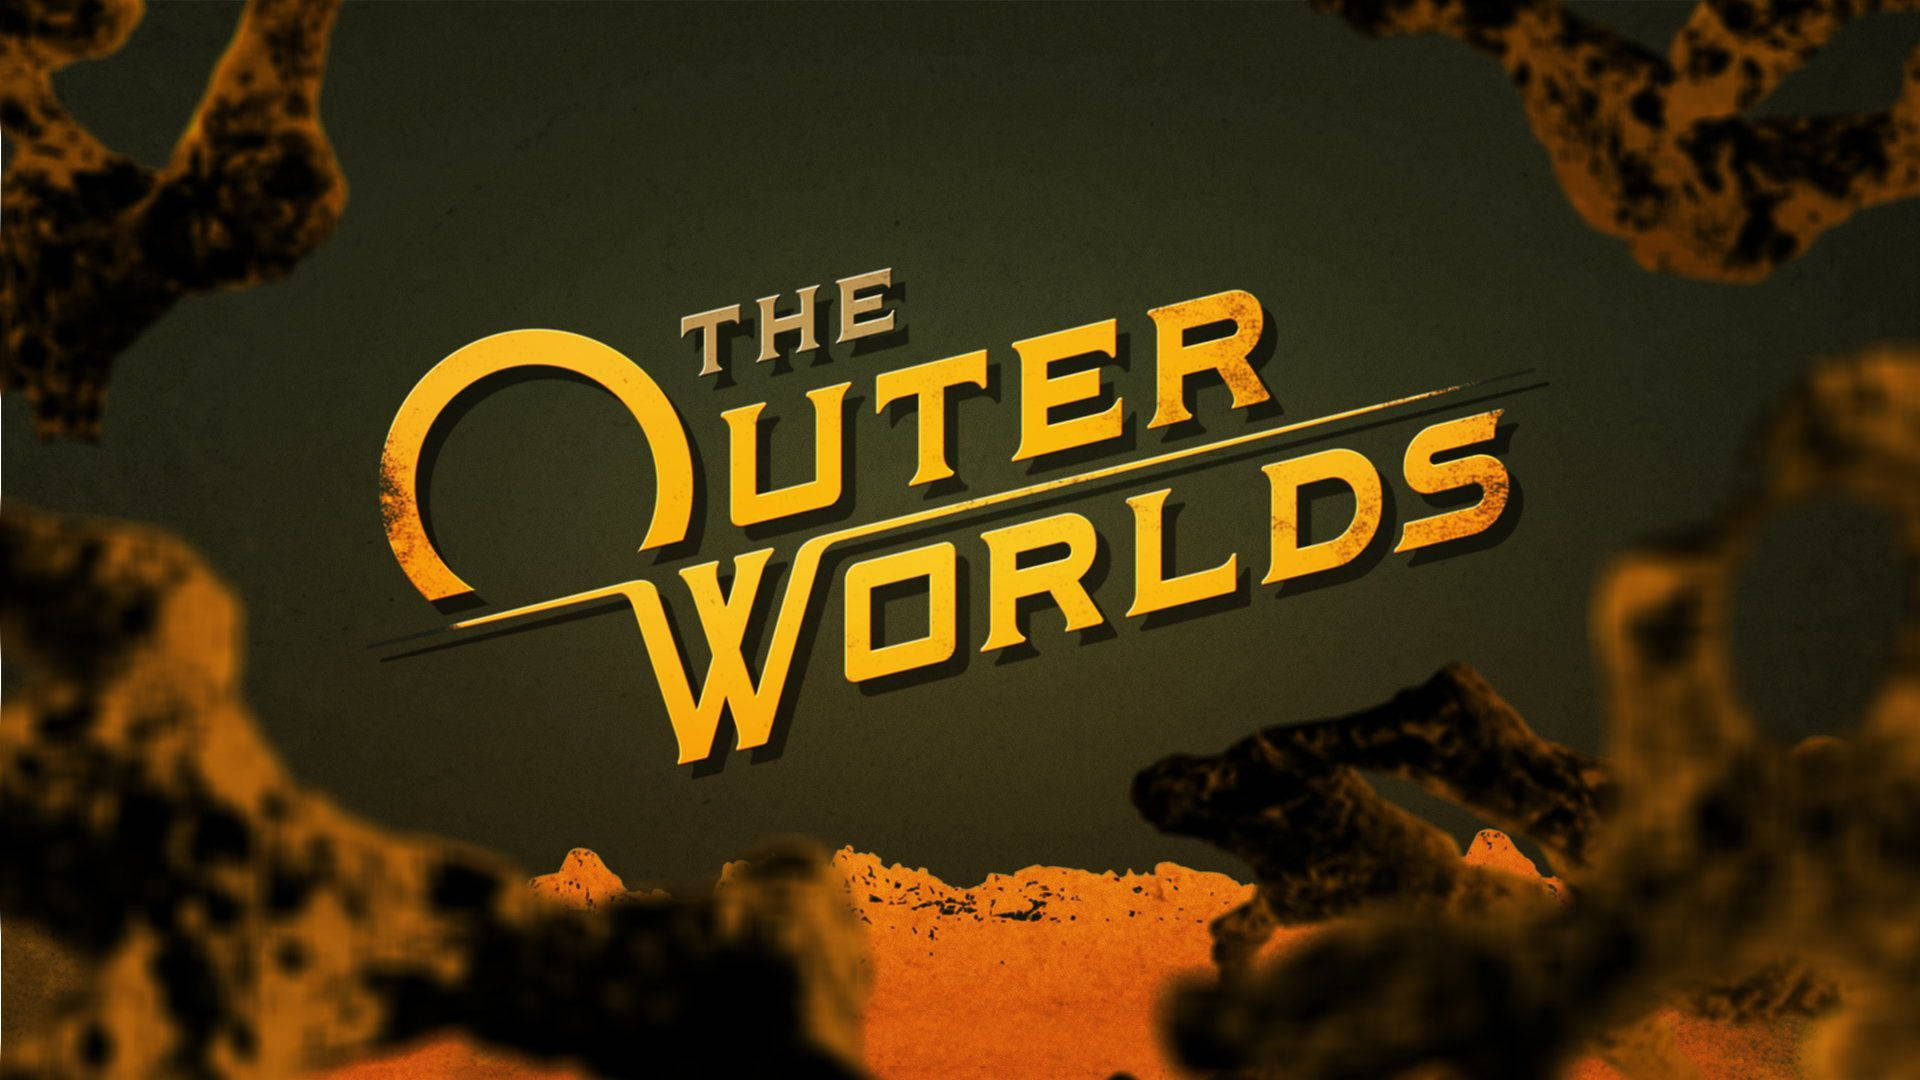 The Outer Worlds Rpg Game Title Background